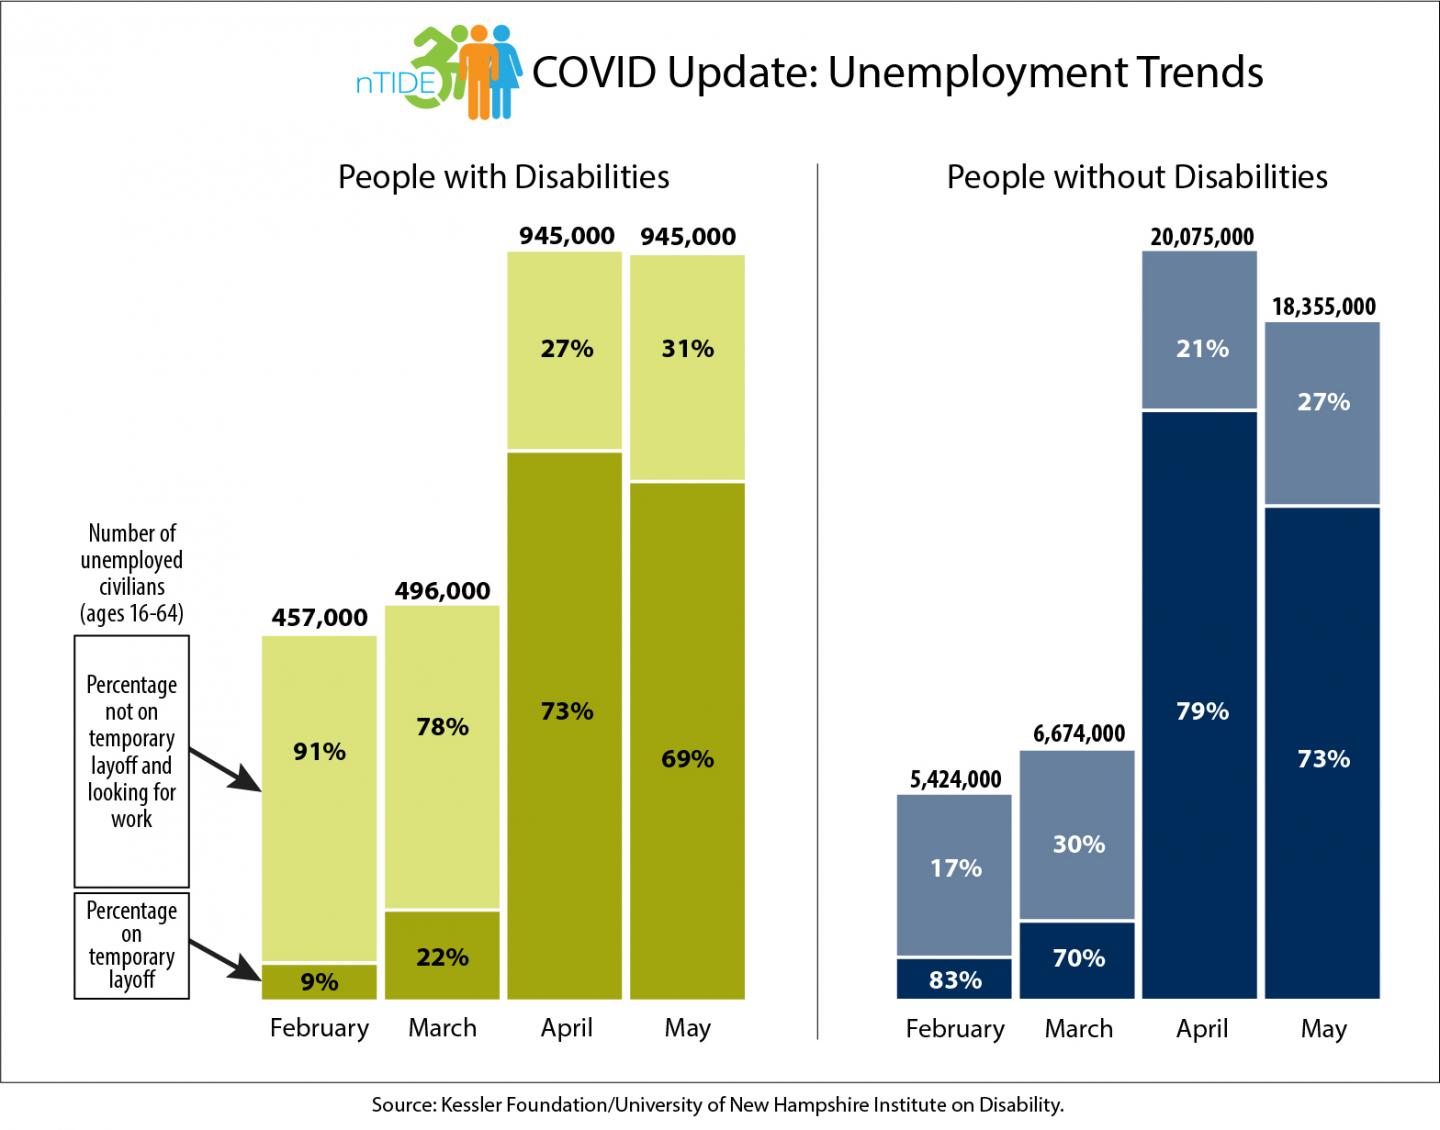 nTIDE June 2020 COVID Update: Unemployment Trends for People with and without Disabilities